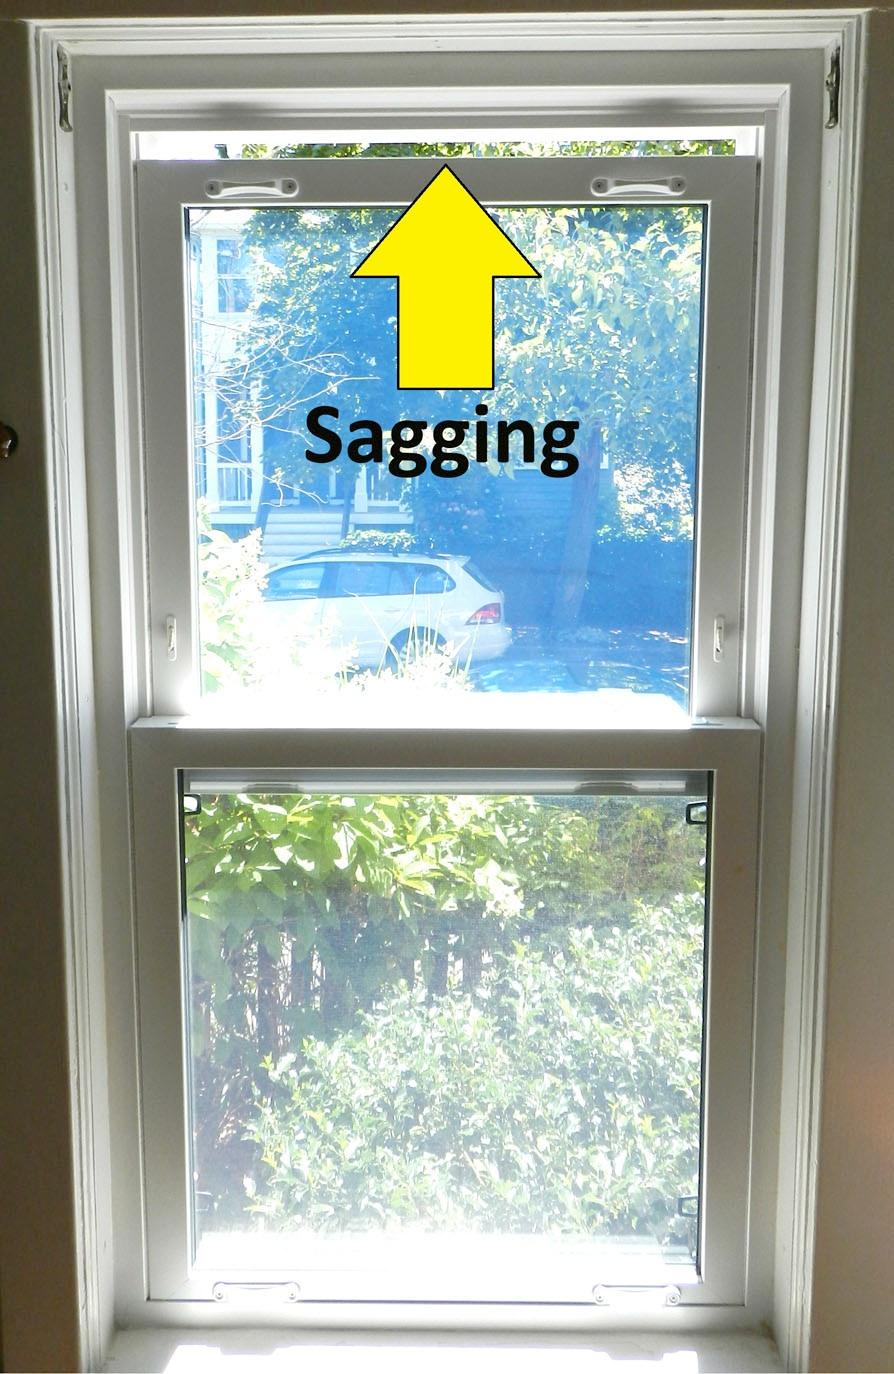 section 31 sagging upper sashes Okay, so you or someone before you got replacement double-sash windows, probably 10 to 15 years ago.